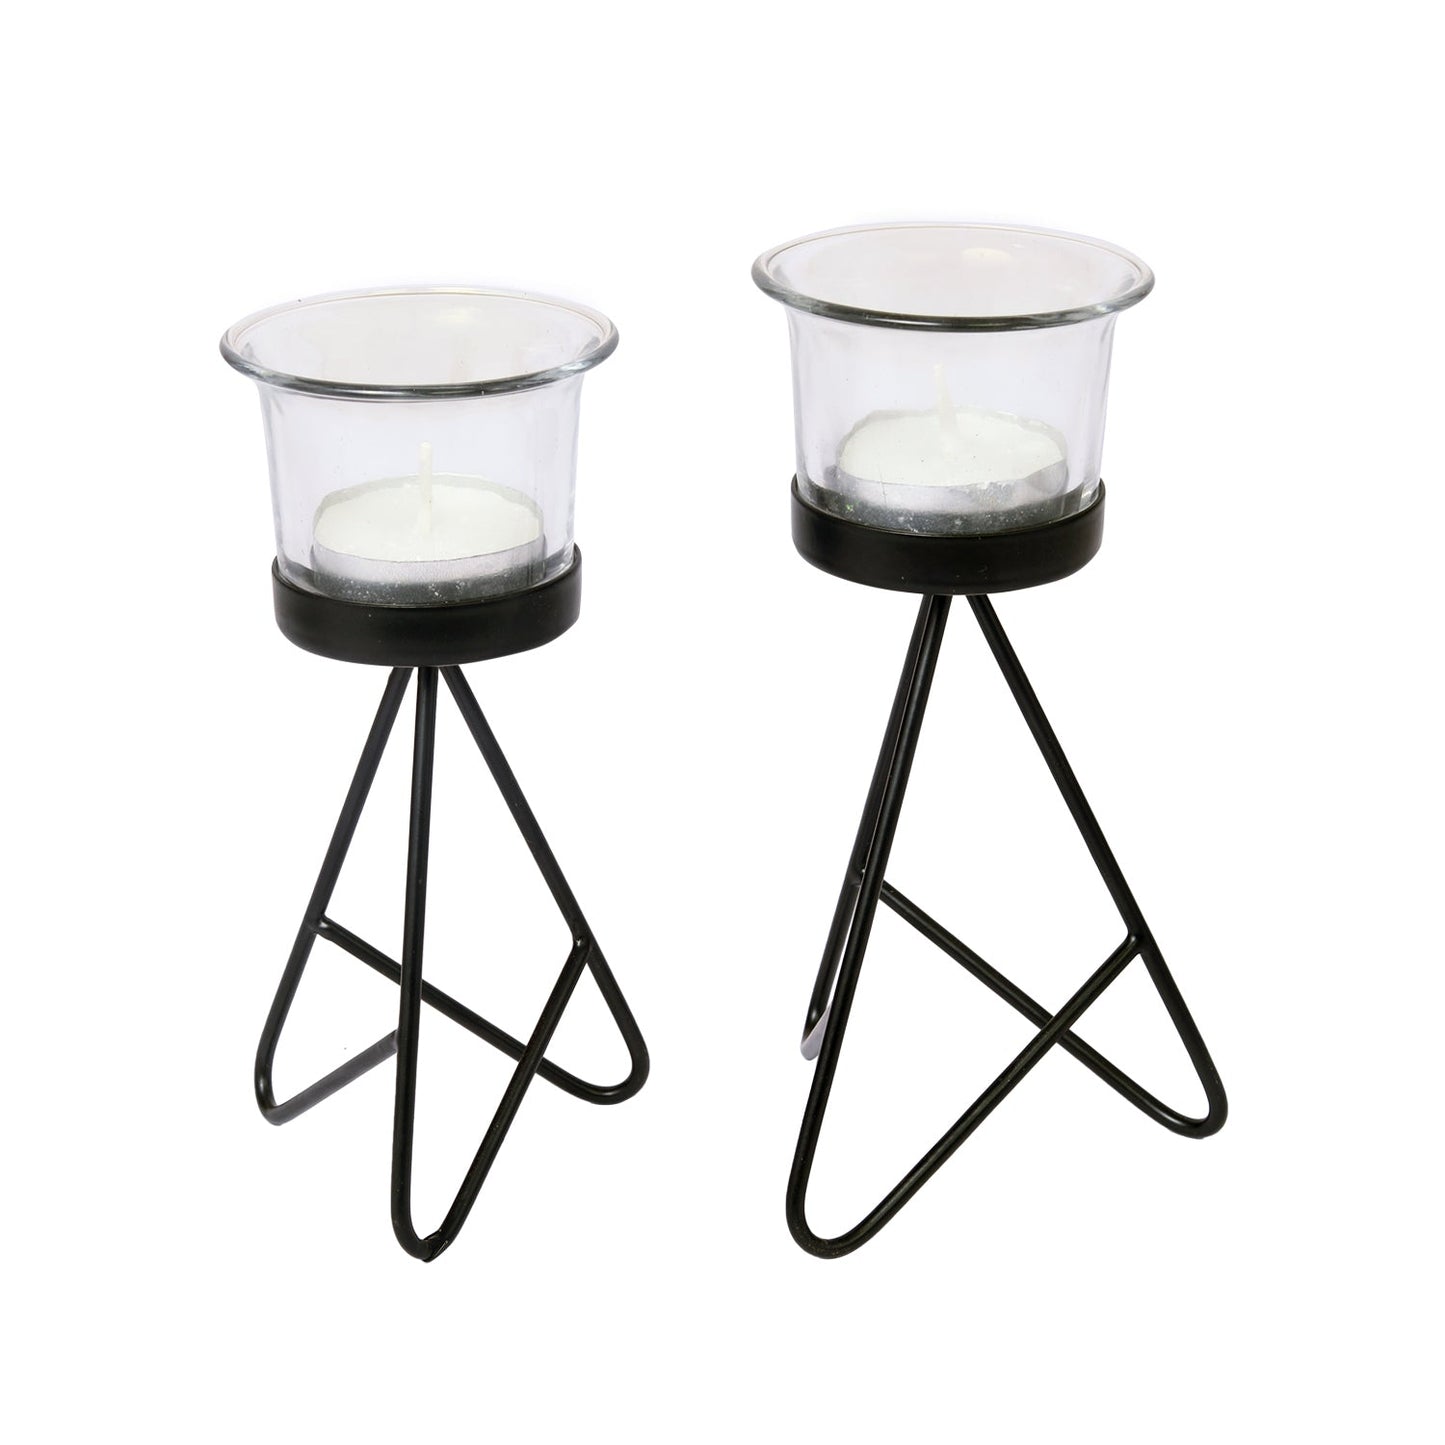 Hosley Metal Candle Holders with 2 Glass / Tealight Candle Holder for Home Decoration Dinning Table, Wedding Décor, Black, Pack of 2